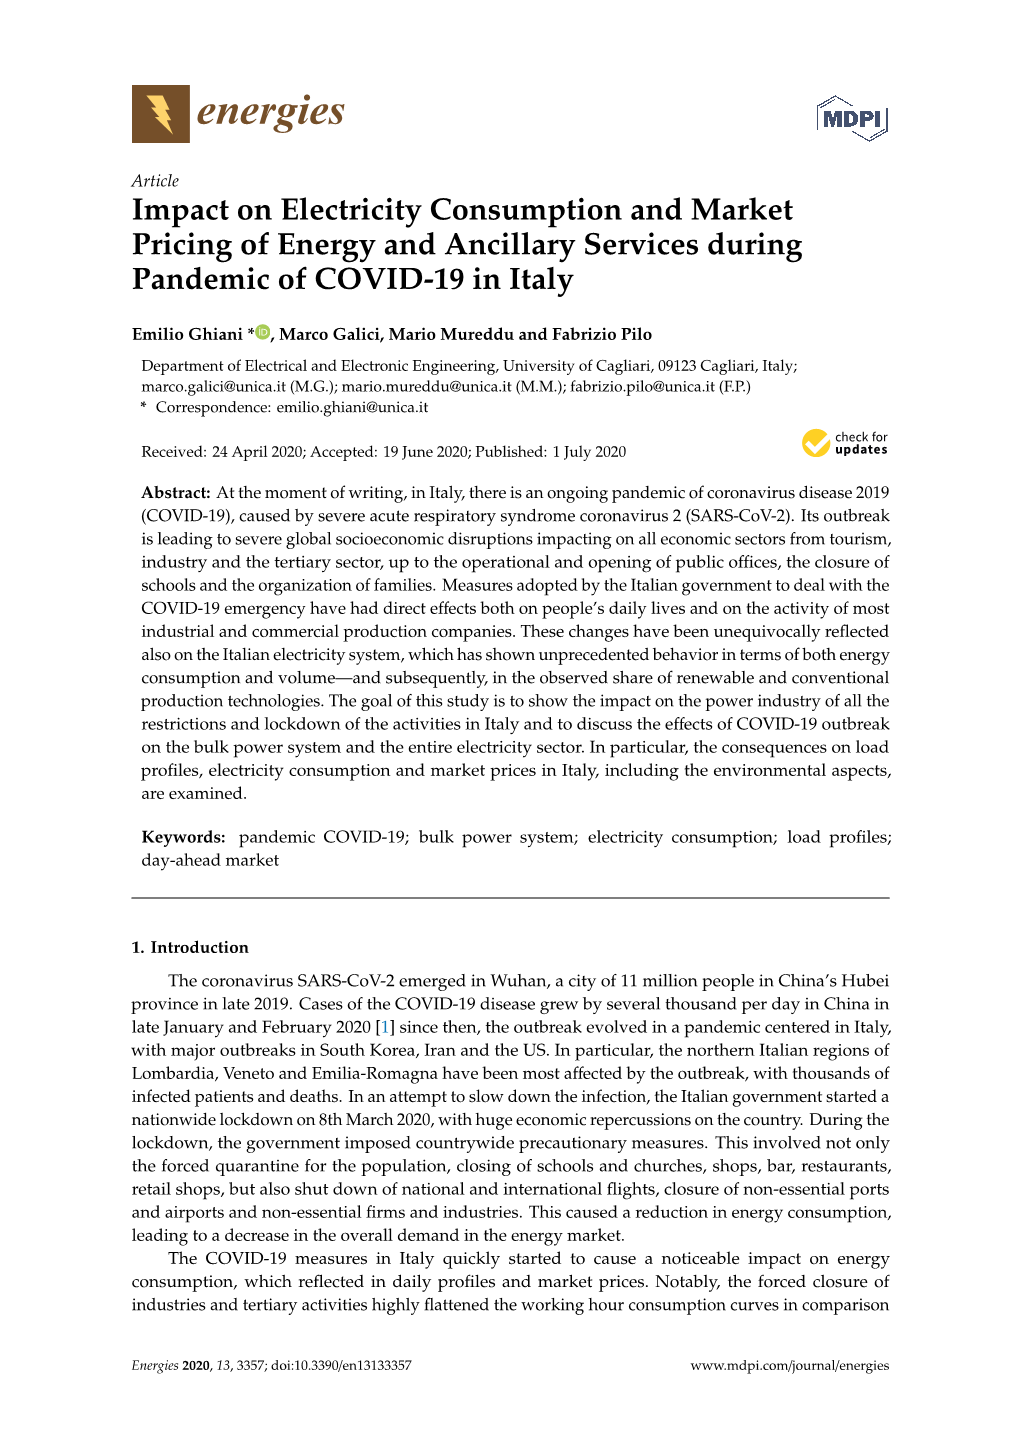 Impact on Electricity Consumption and Market Pricing of Energy and Ancillary Services During Pandemic of COVID-19 in Italy